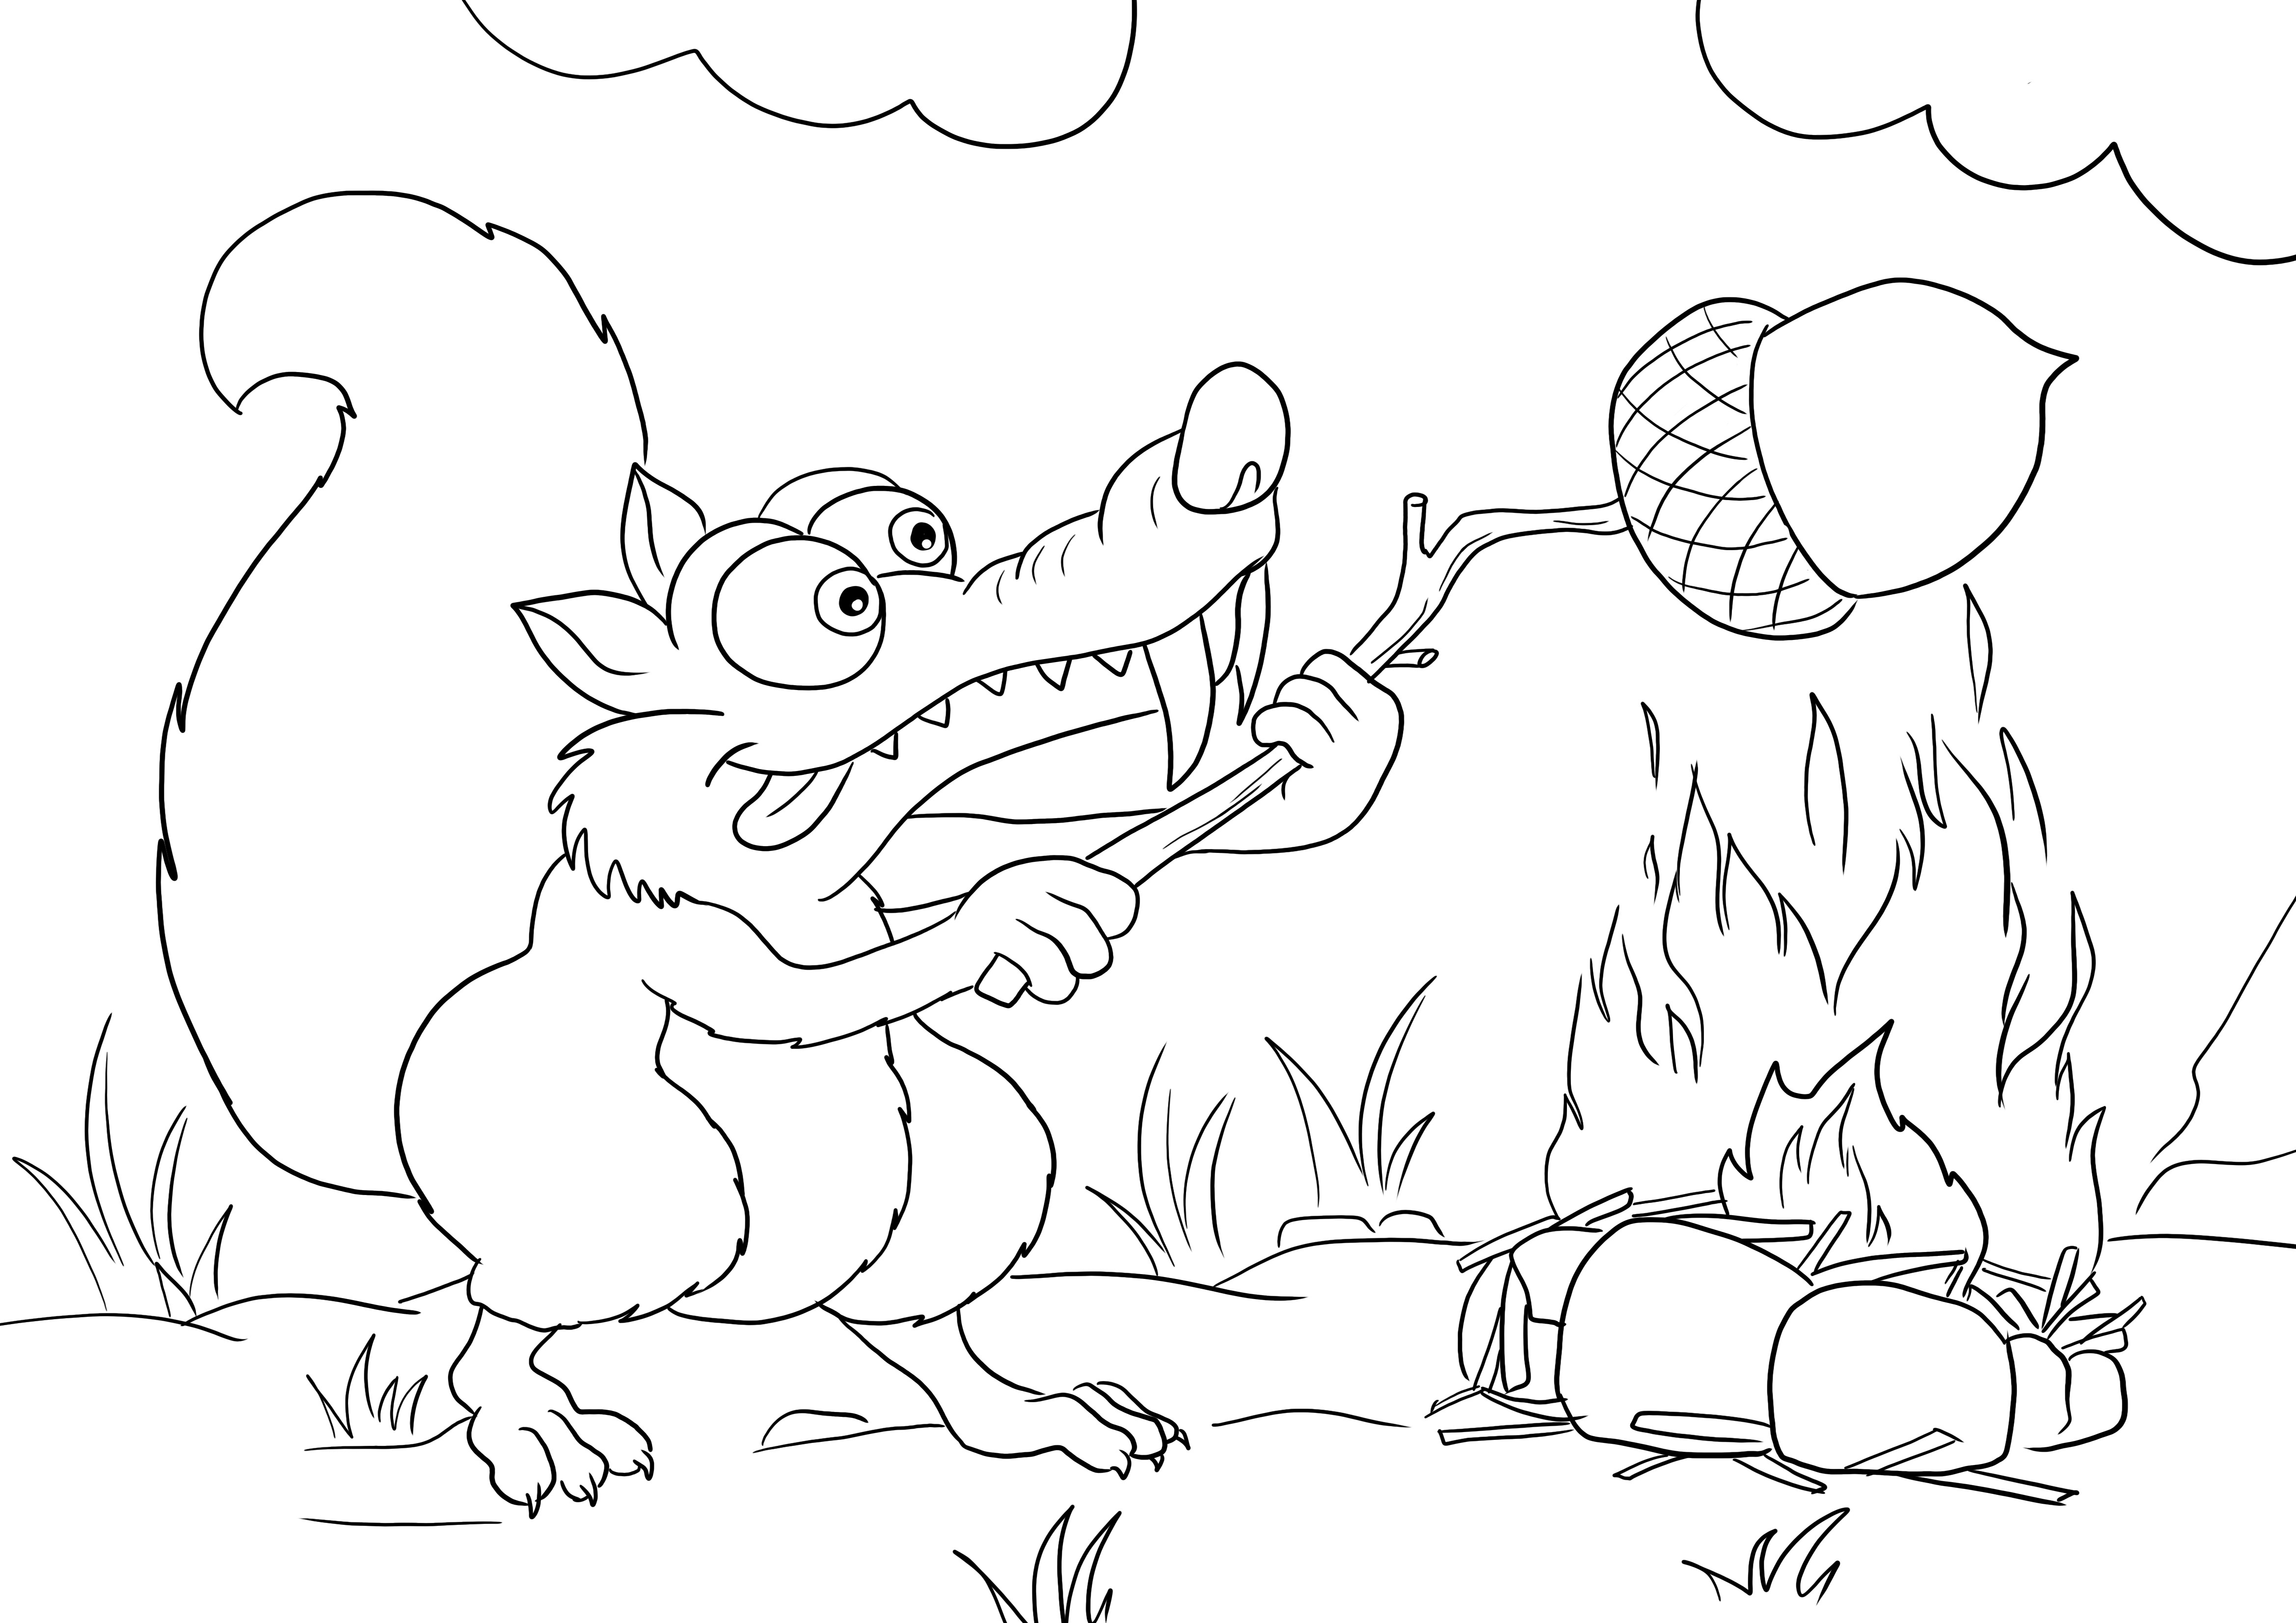 Scrat the Squirrel cooking his acorn-free printable for coloring picture